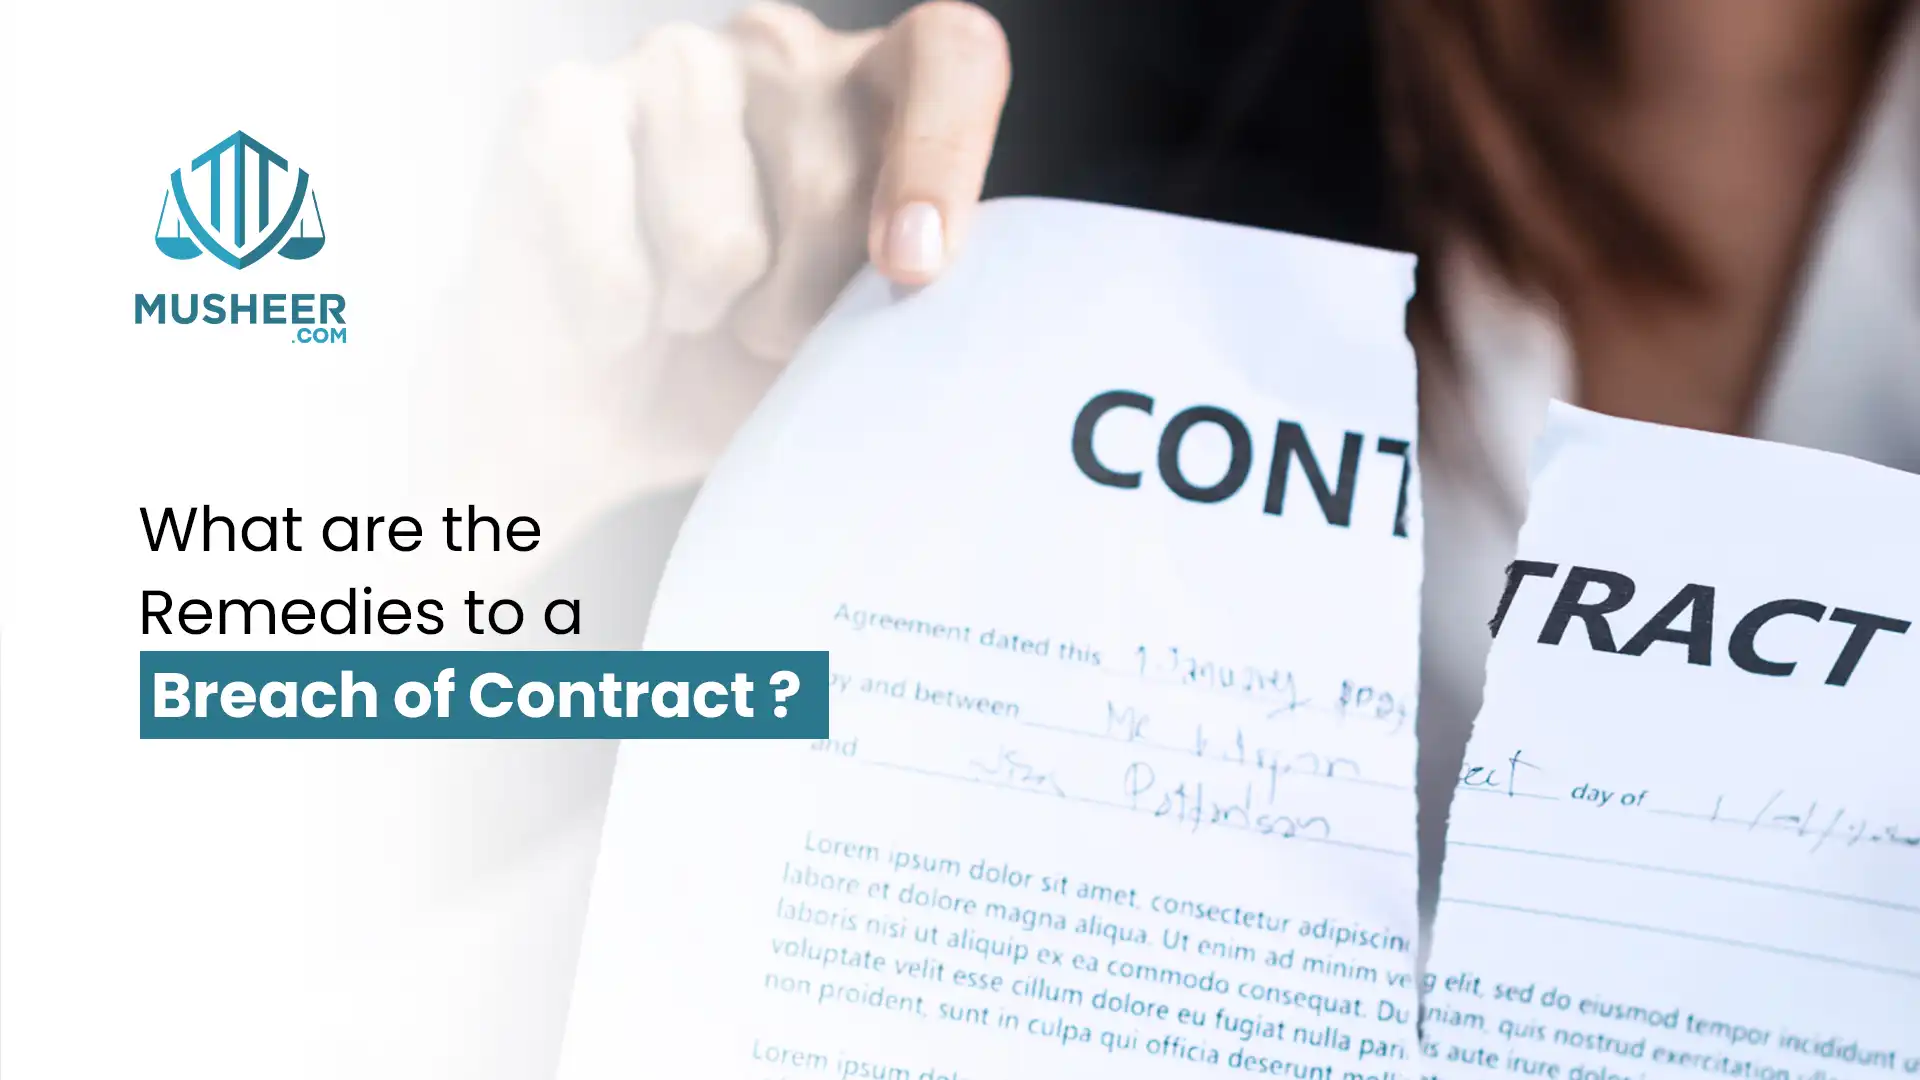 What are the remedies to a breach of contract